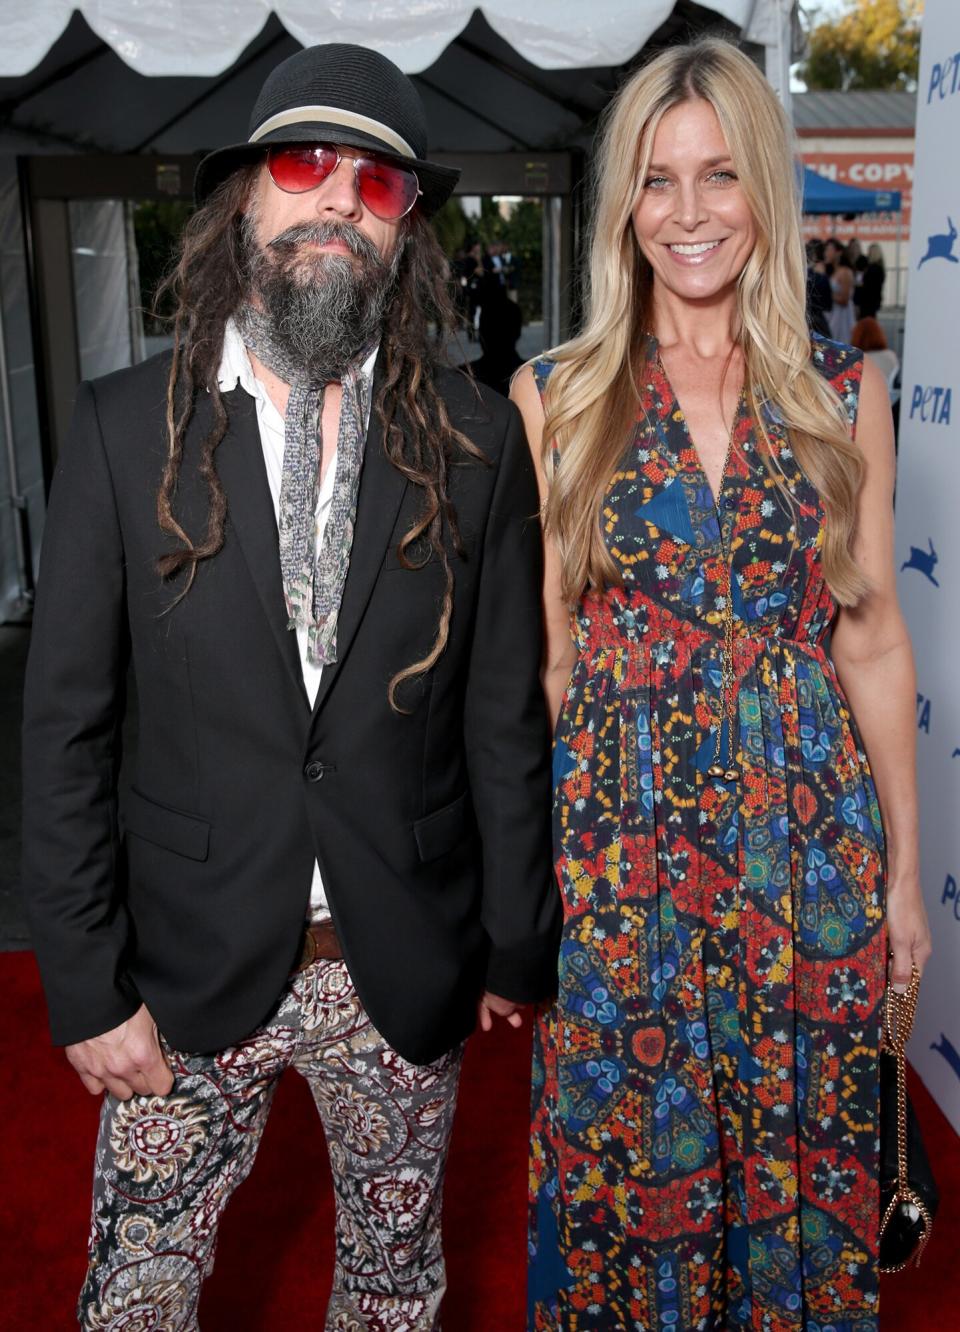 Rob Zombie and Sheri Moon Zombie attends PETA's 35th Anniversary Party at Hollywood Palladium on September 30, 2015 in Los Angeles, California